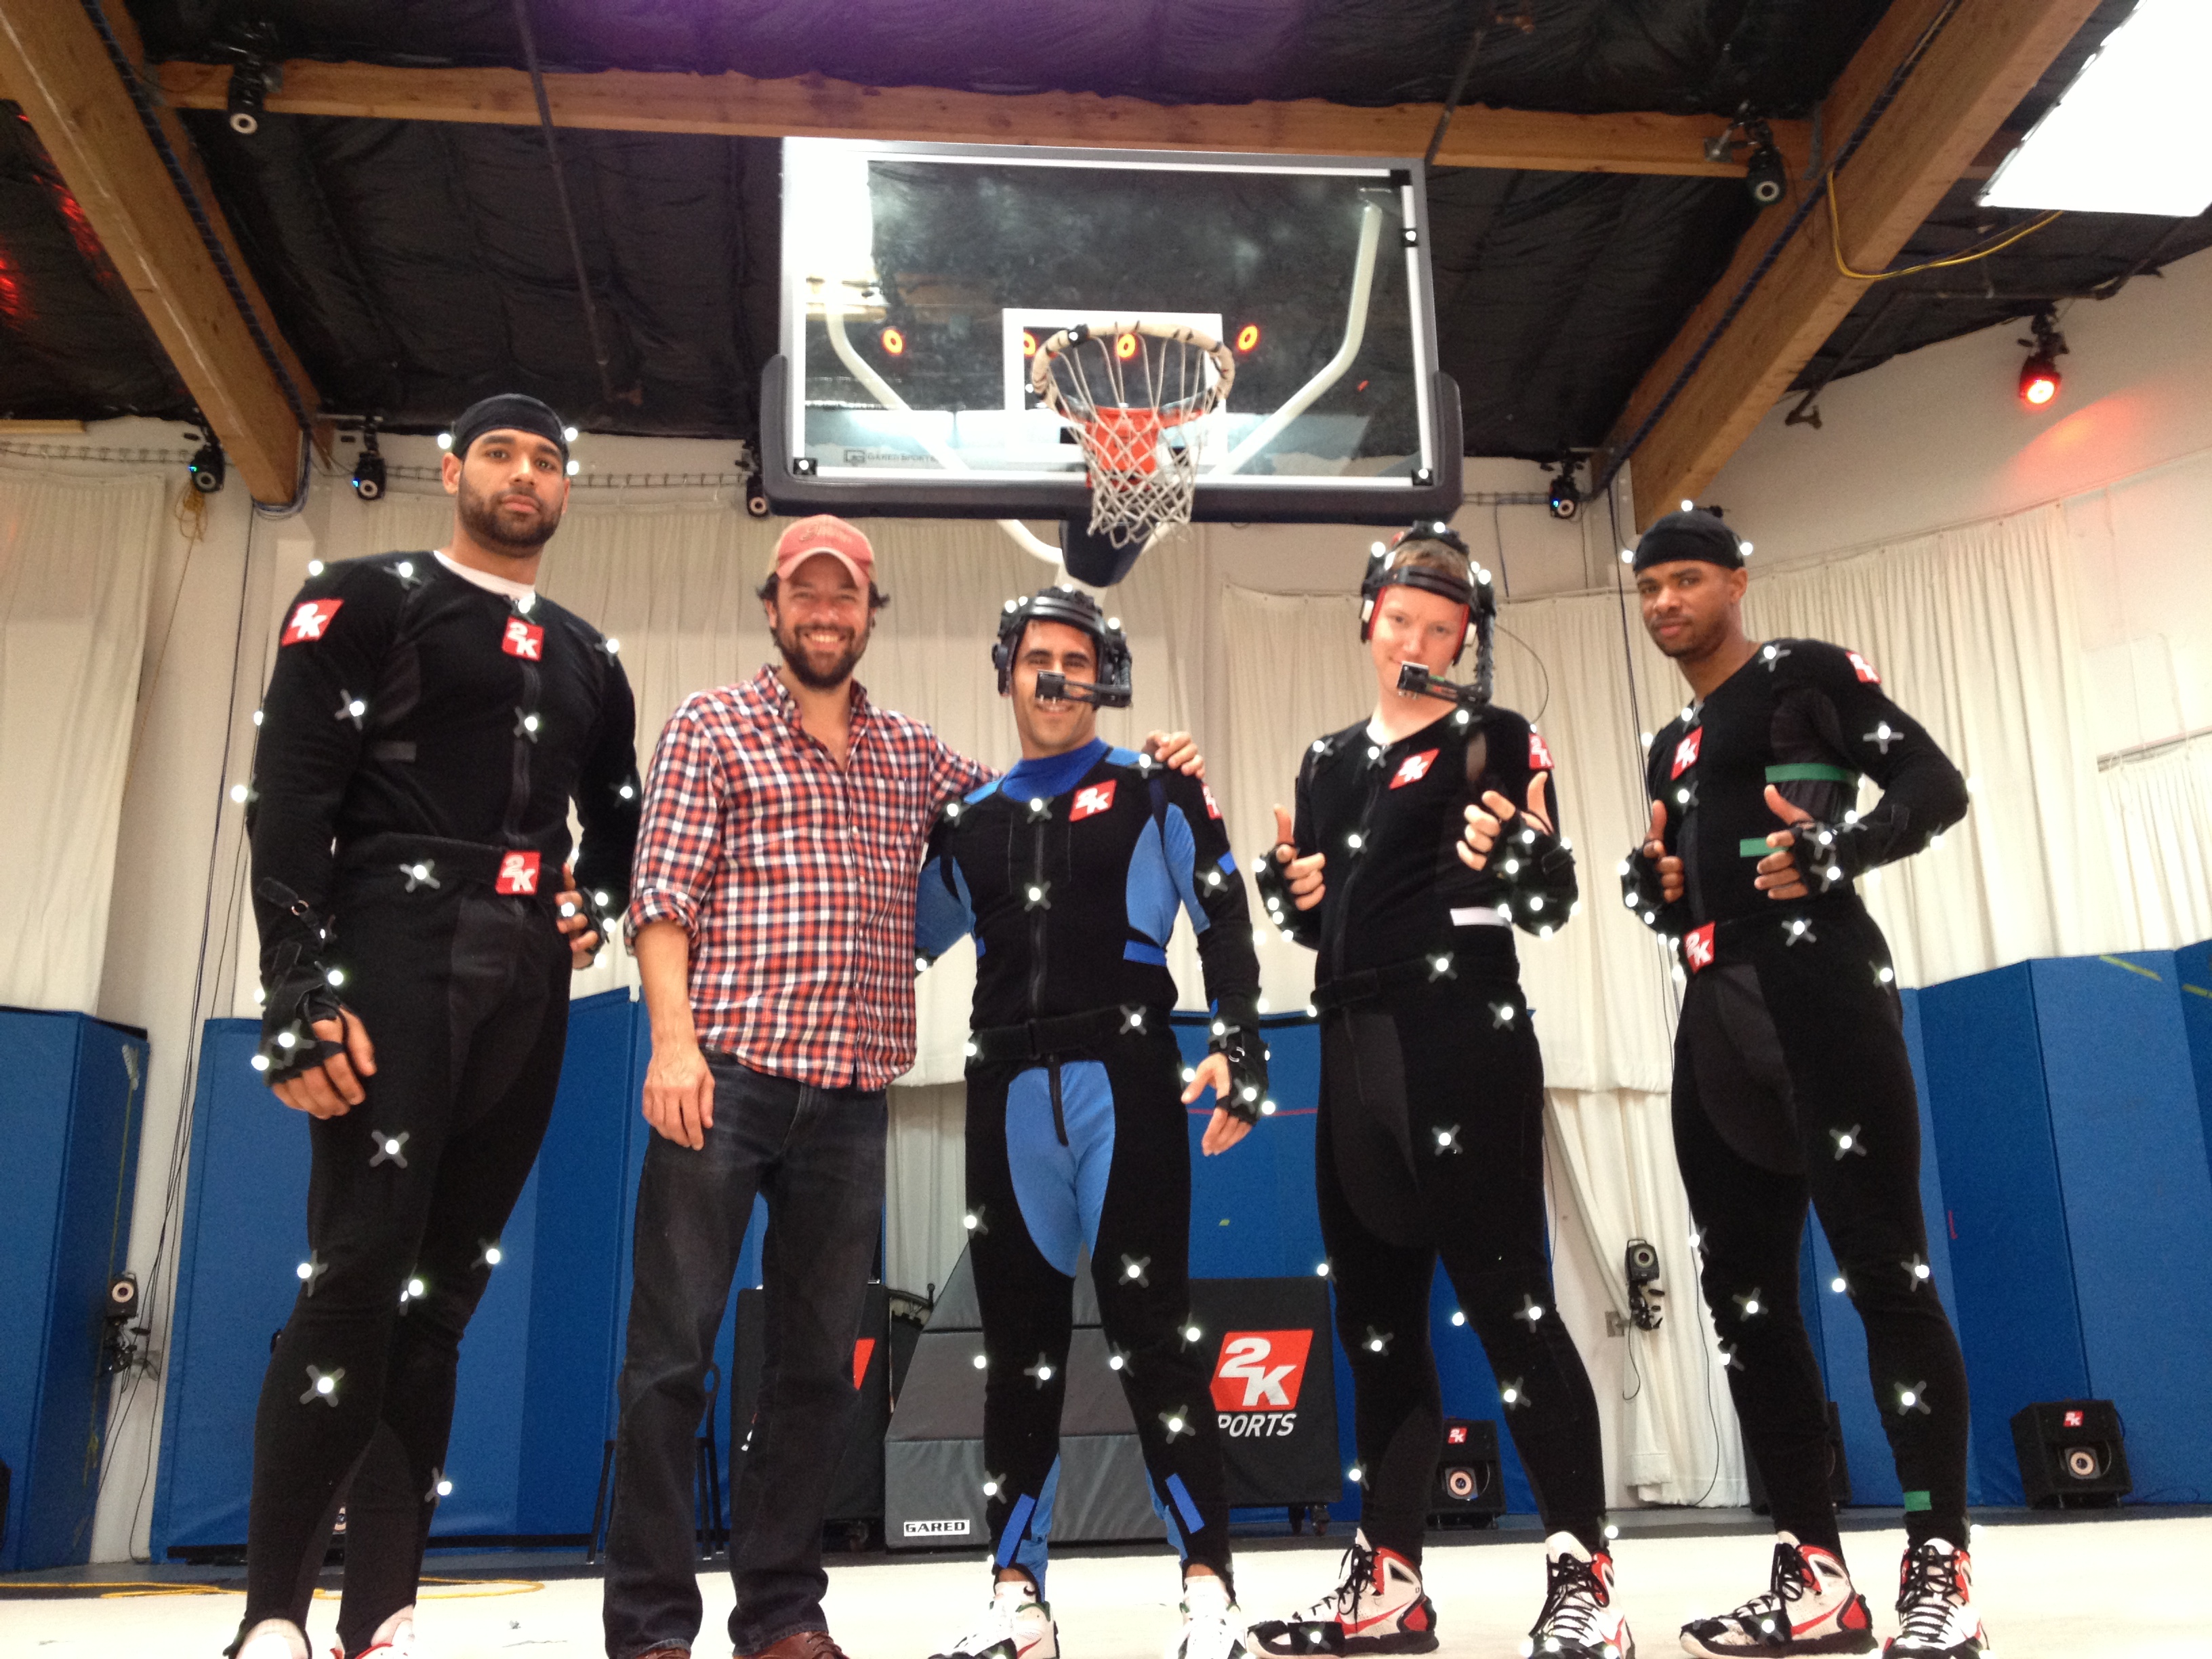 On set of NBA 2K14 at 2K games motion capture studio in Novato, CA. Pictured from Left to Right: 2K14 Motion Capture Player, Director Chris Papierniak, Trainer David Ojakian, MyPlayer Mark Middleton, 2K14 Motion Capture Player.